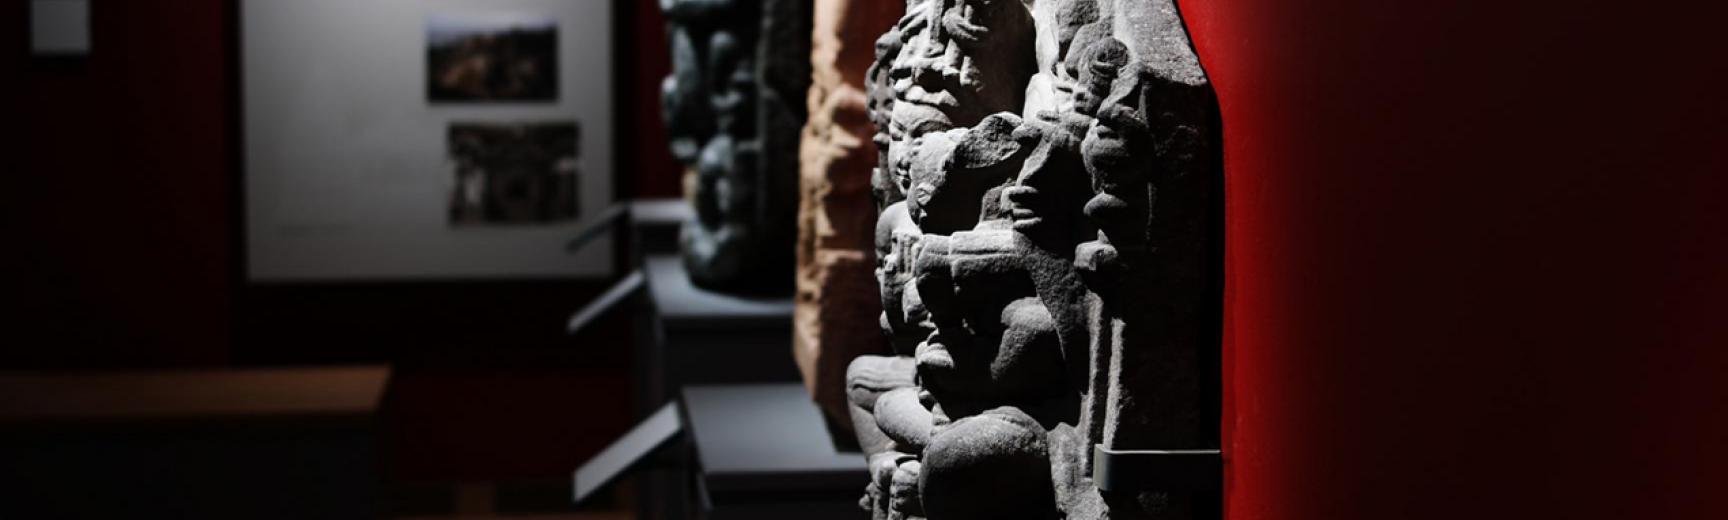 The India from AD 600 Gallery at the Ashmolean Museum